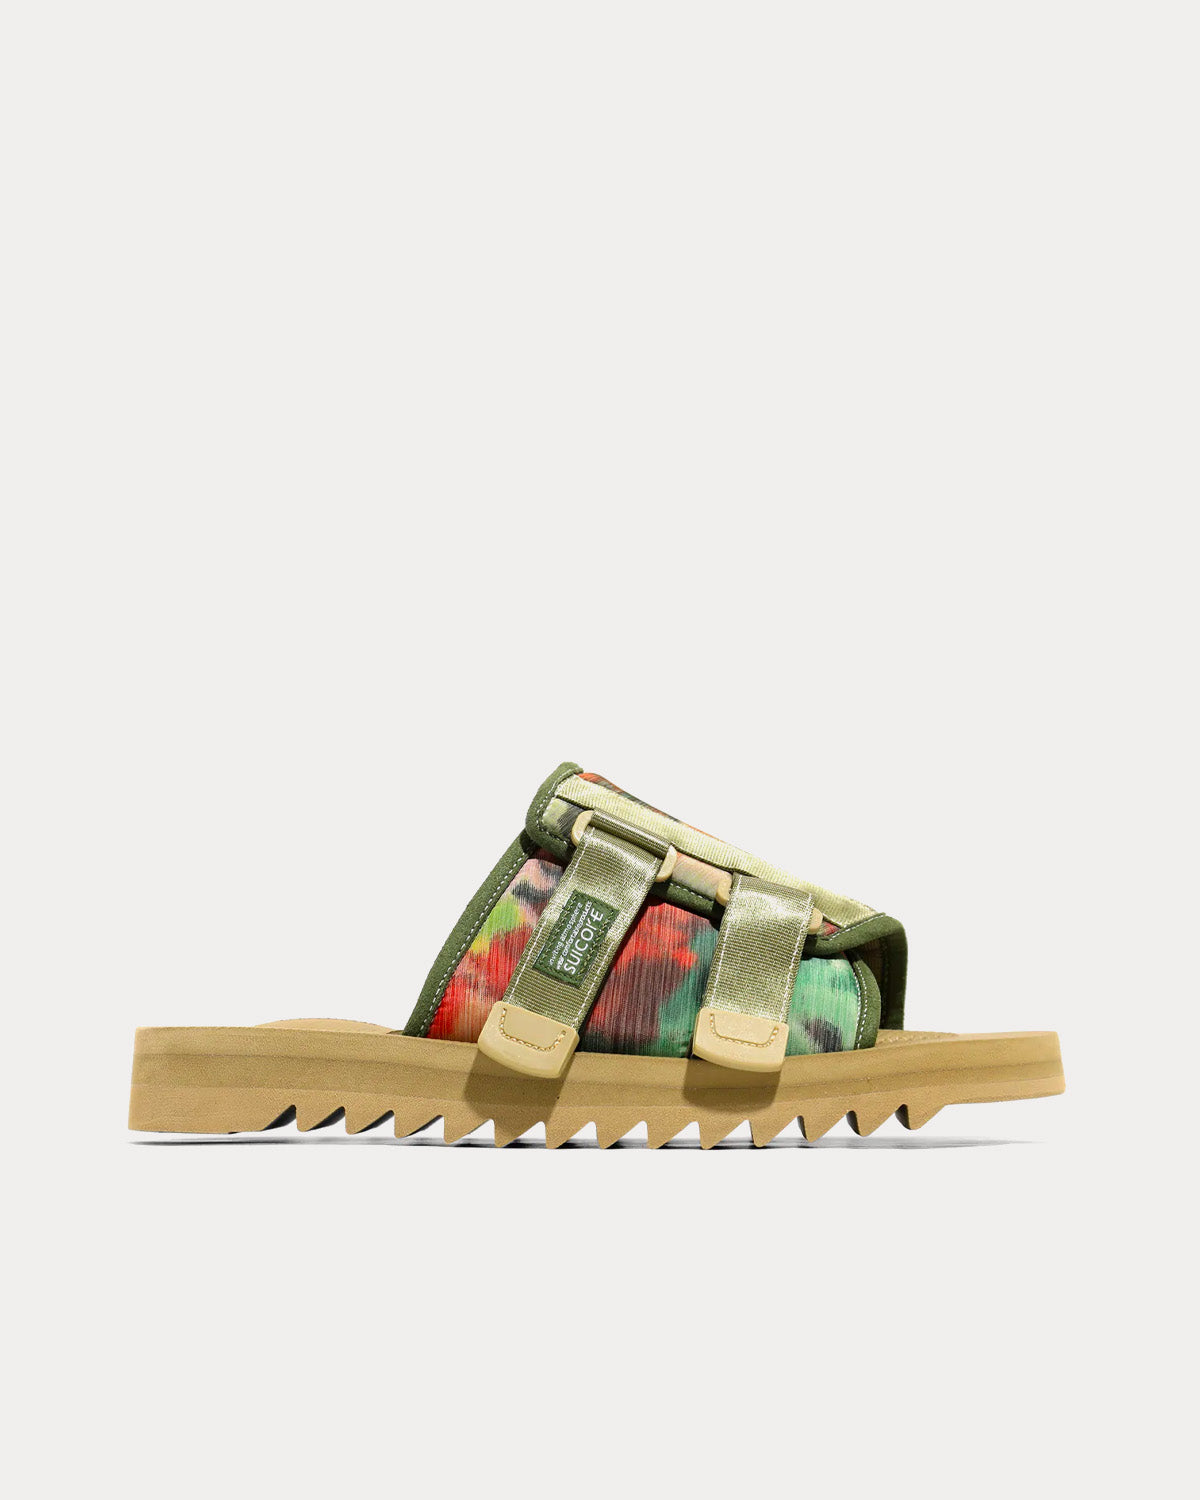 Suicoke x Engineered Garments - KAW-CabEG Floral Camo Sandals